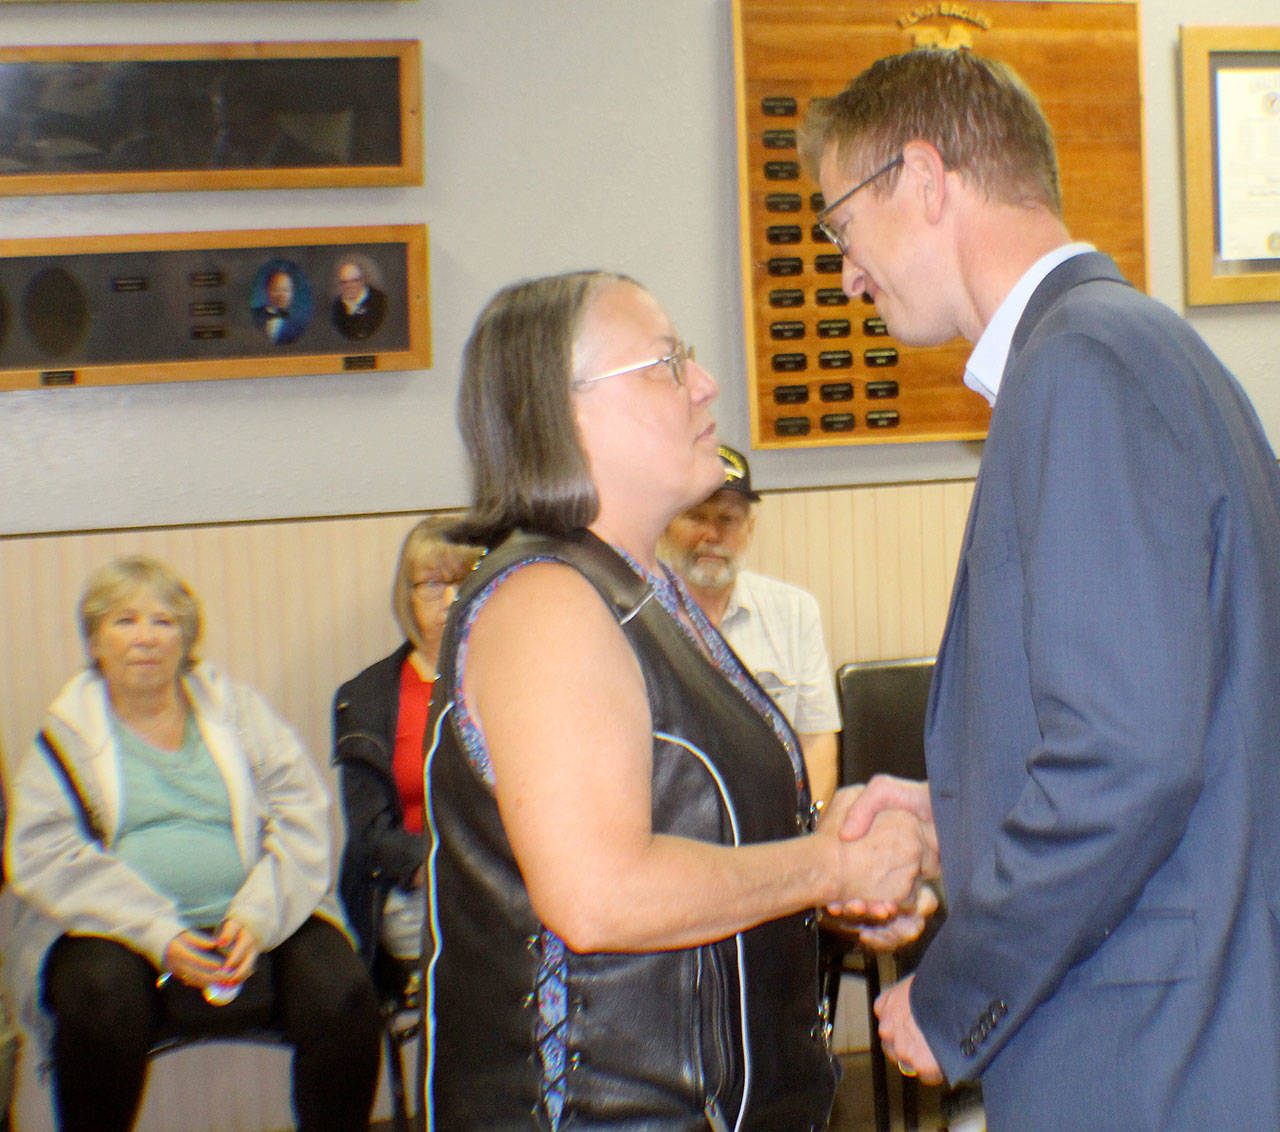 Terri Baske, left, shakes Rep. Derek Kilmer’s hand during a ceremony to honor Vietnam War veterans Wednesday, Aug. 22, 2018, in Elma. Baske’s father-in-law served two tours in Vietnam. Her late husband also served. Photo by Michael Lang, The Vidette